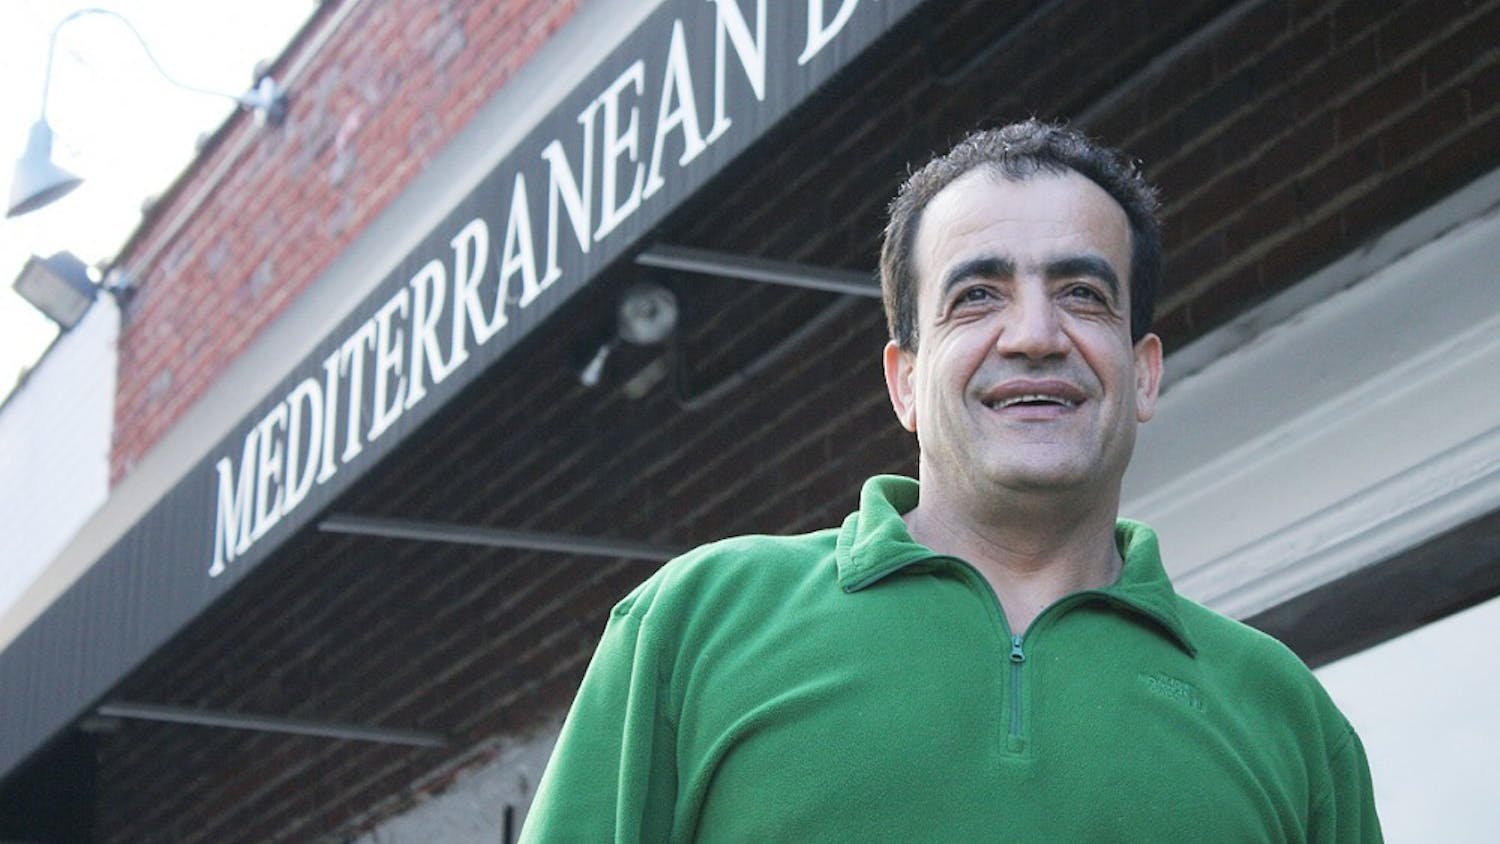 Jamil Kadoura is a Muslim who has owned and operated Mediterranean Deli in Chapel Hill for over 20 years.  He said that he has never felt any discrimination in Chapel Hill for being Muslim.  "It's very accepting here," he said.